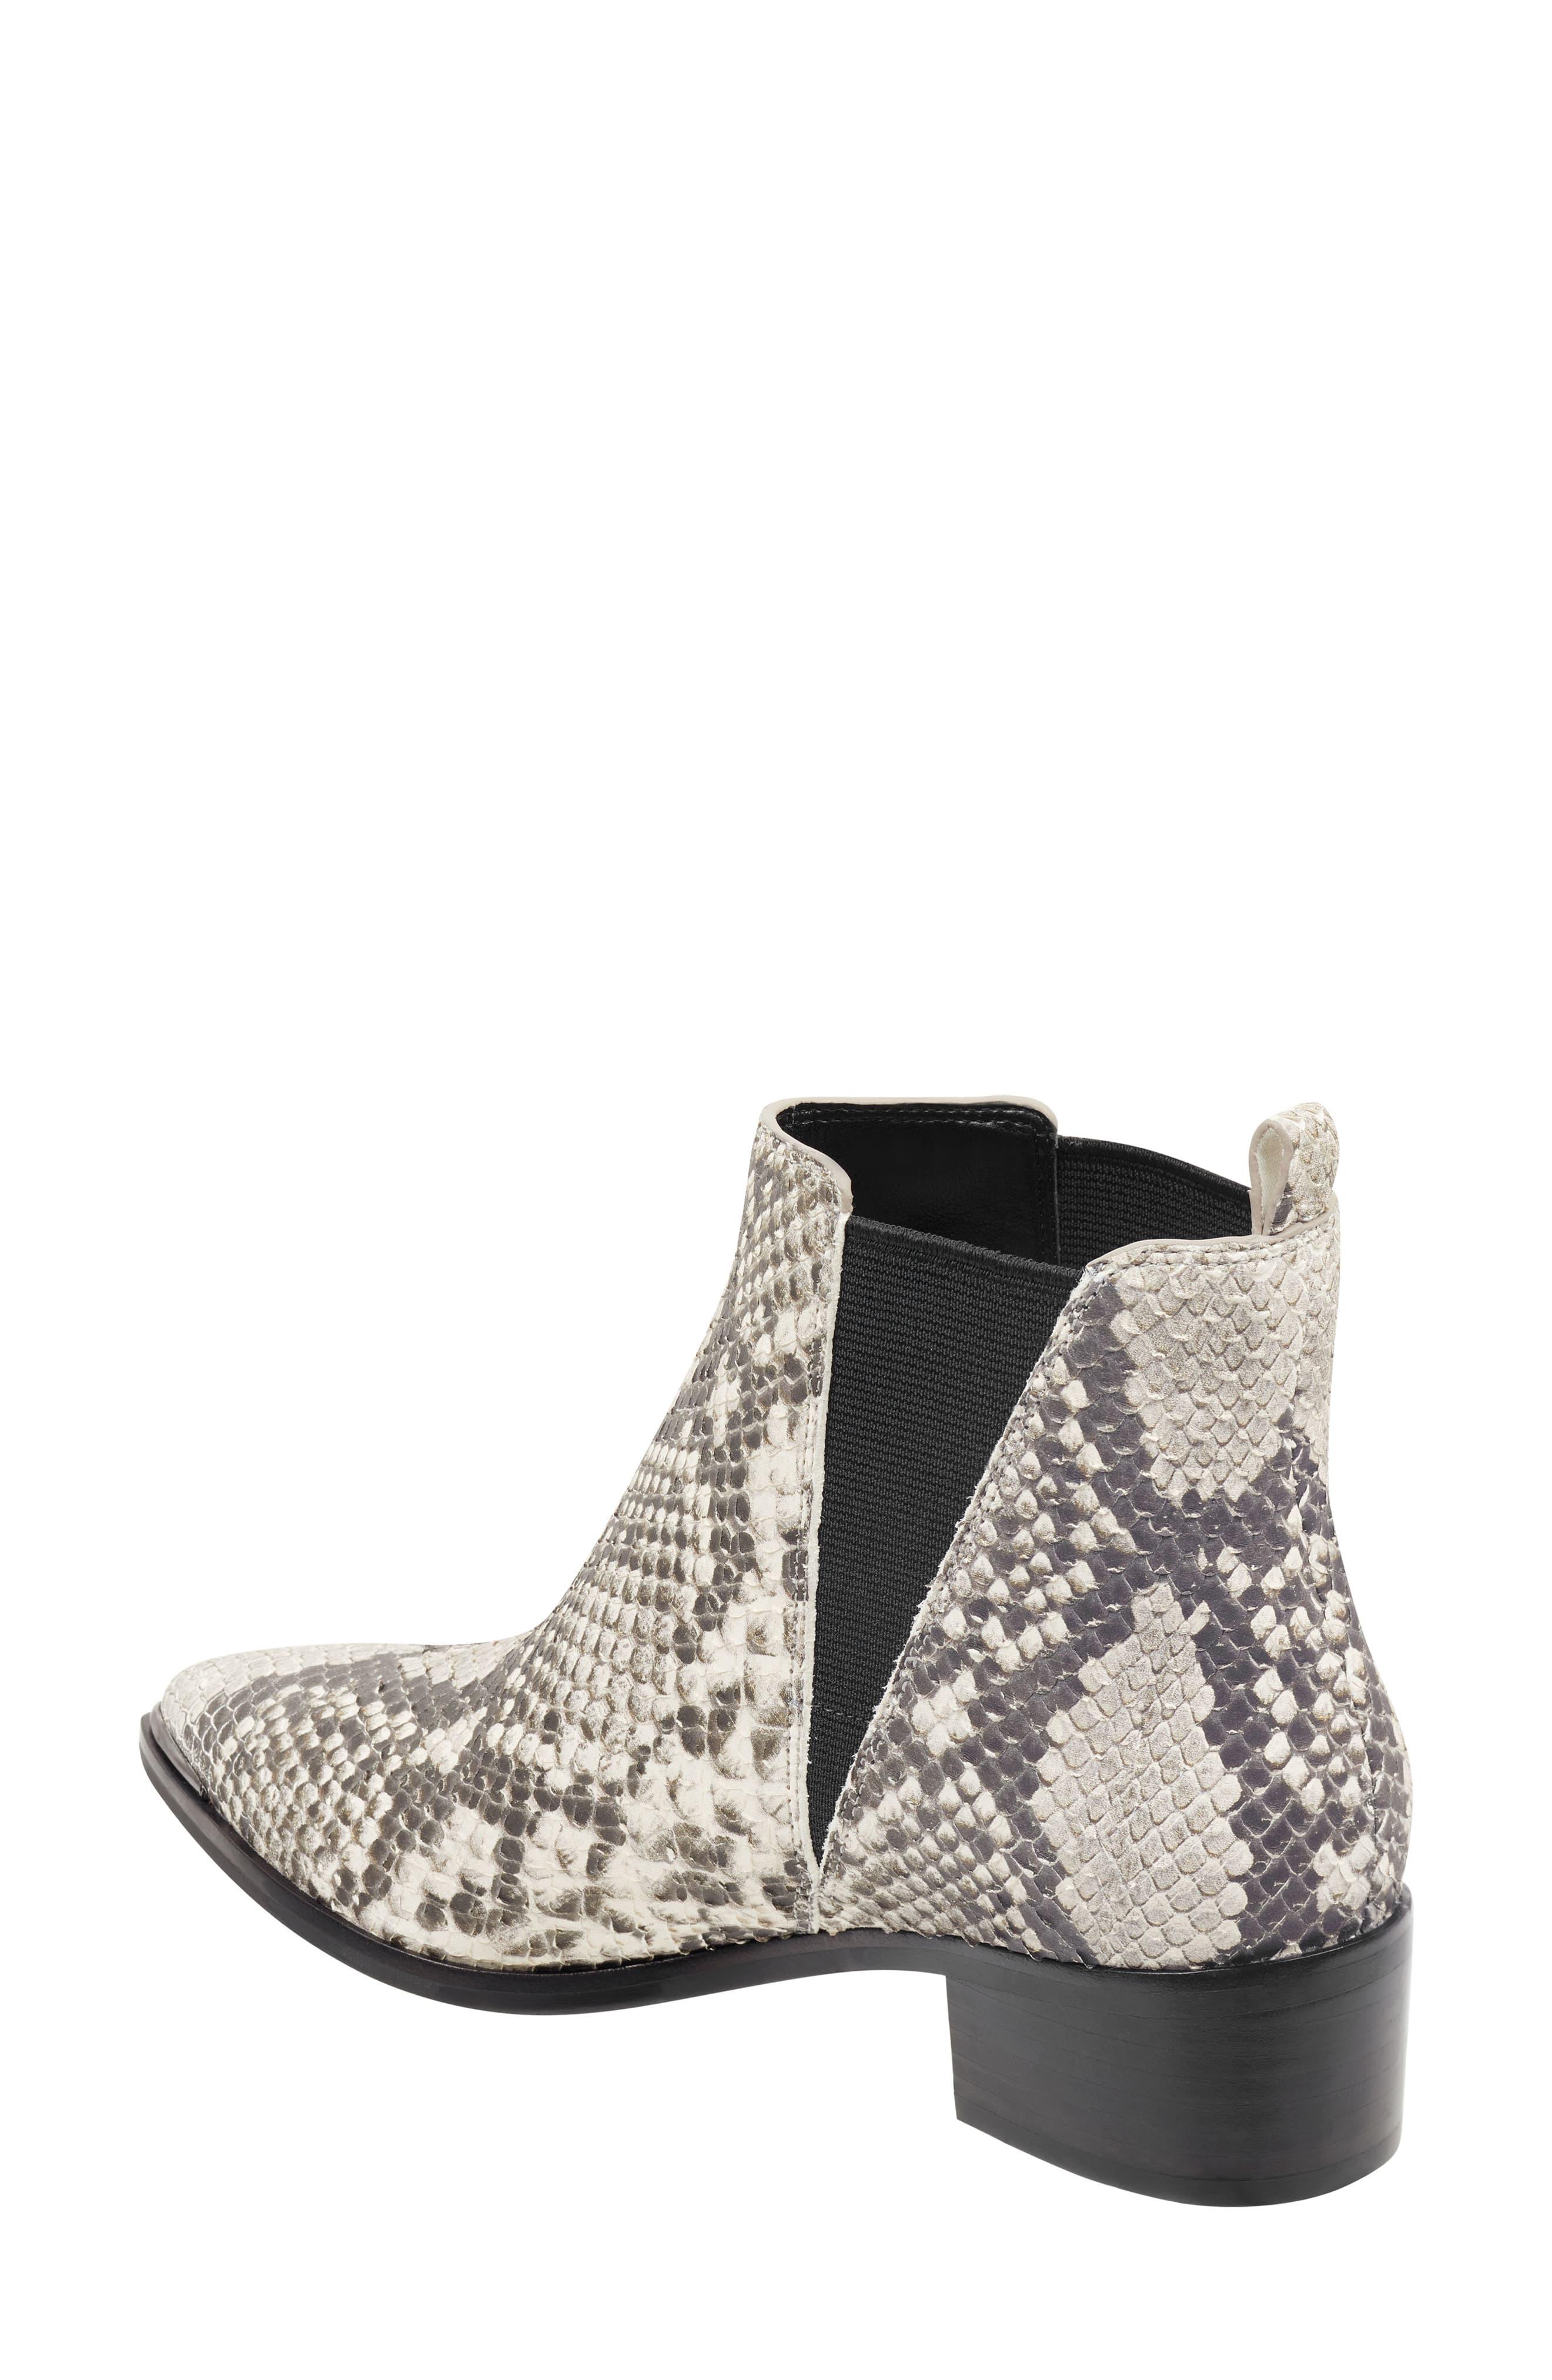 Marc Fisher 'yale' Chelsea Boot in Natural Snake Leather